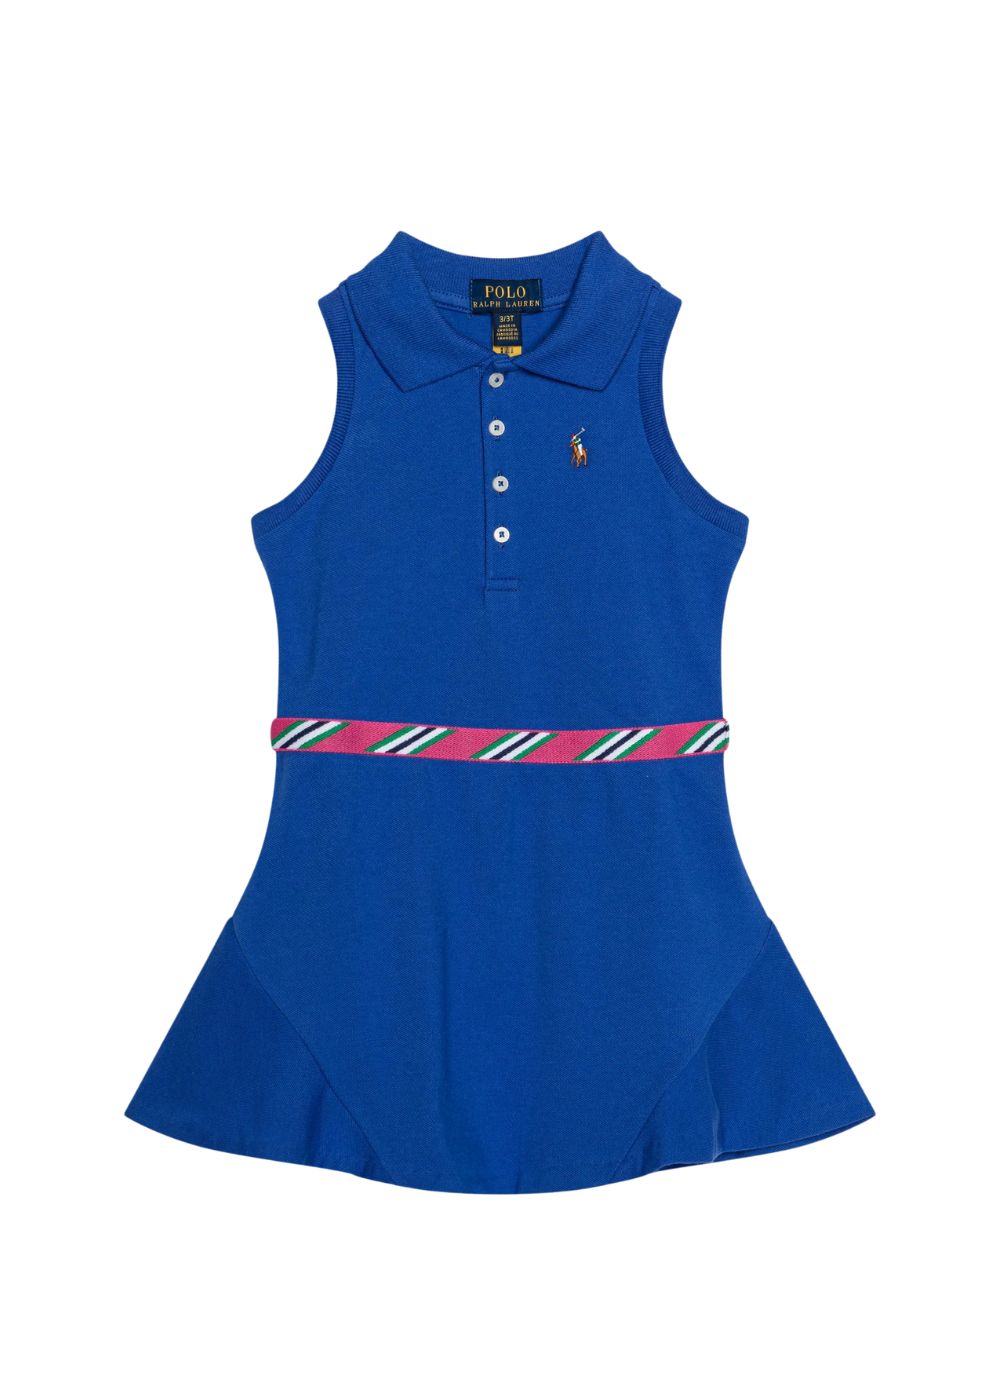 Featured image for “Polo Ralph Lauren Abito Polo”